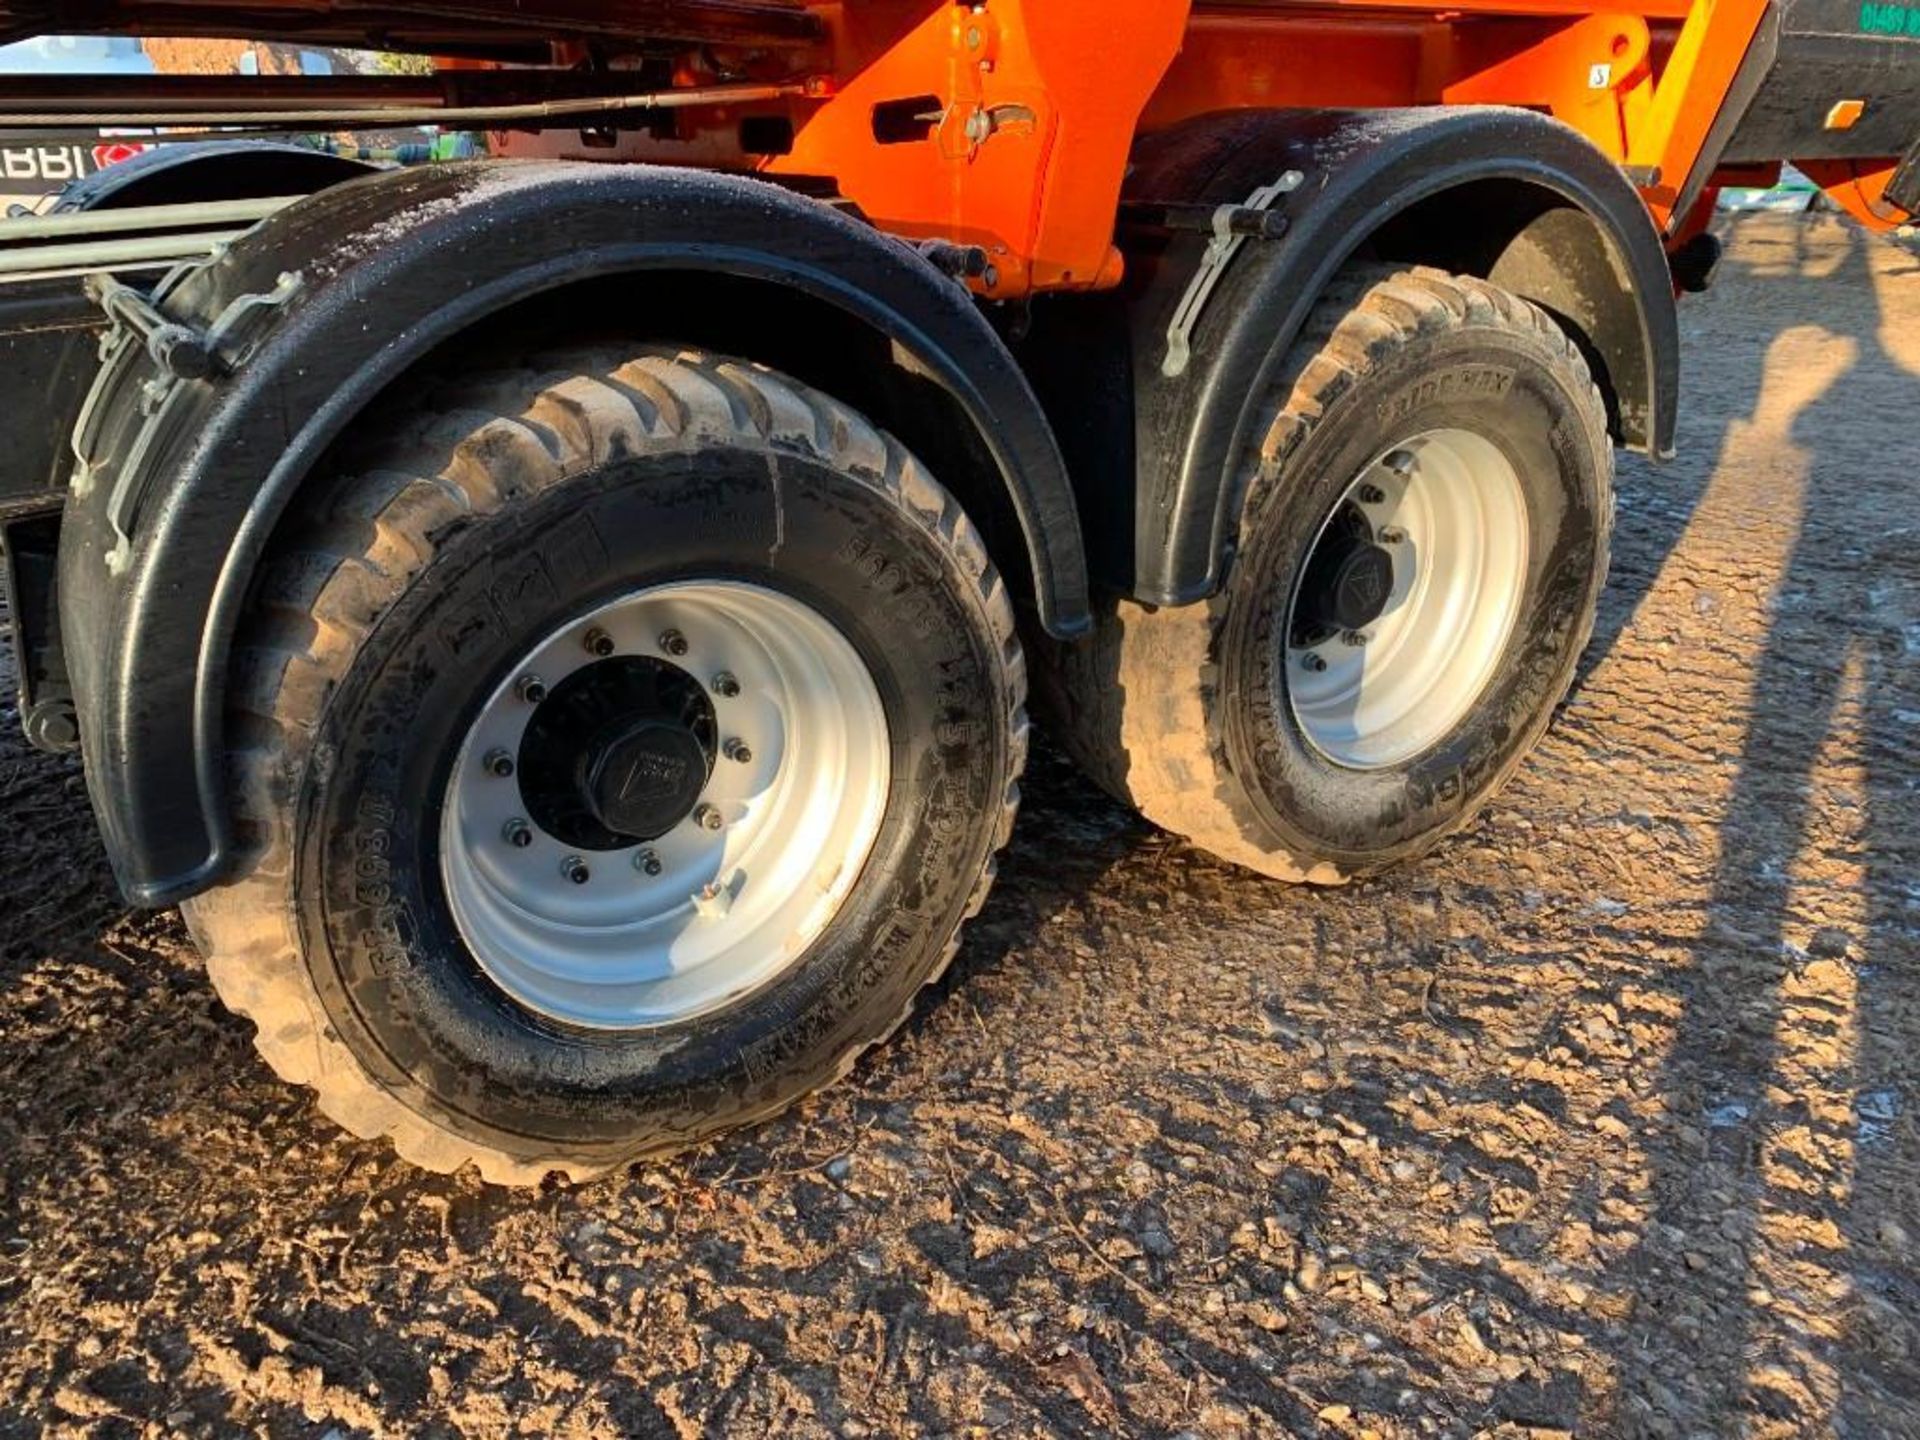 2020 Transtacker 4100 Bale Chaser, Tandem Axle on Flotation Tyres 560/45 R22.5, c/w Weighcells Hydra - Image 9 of 10